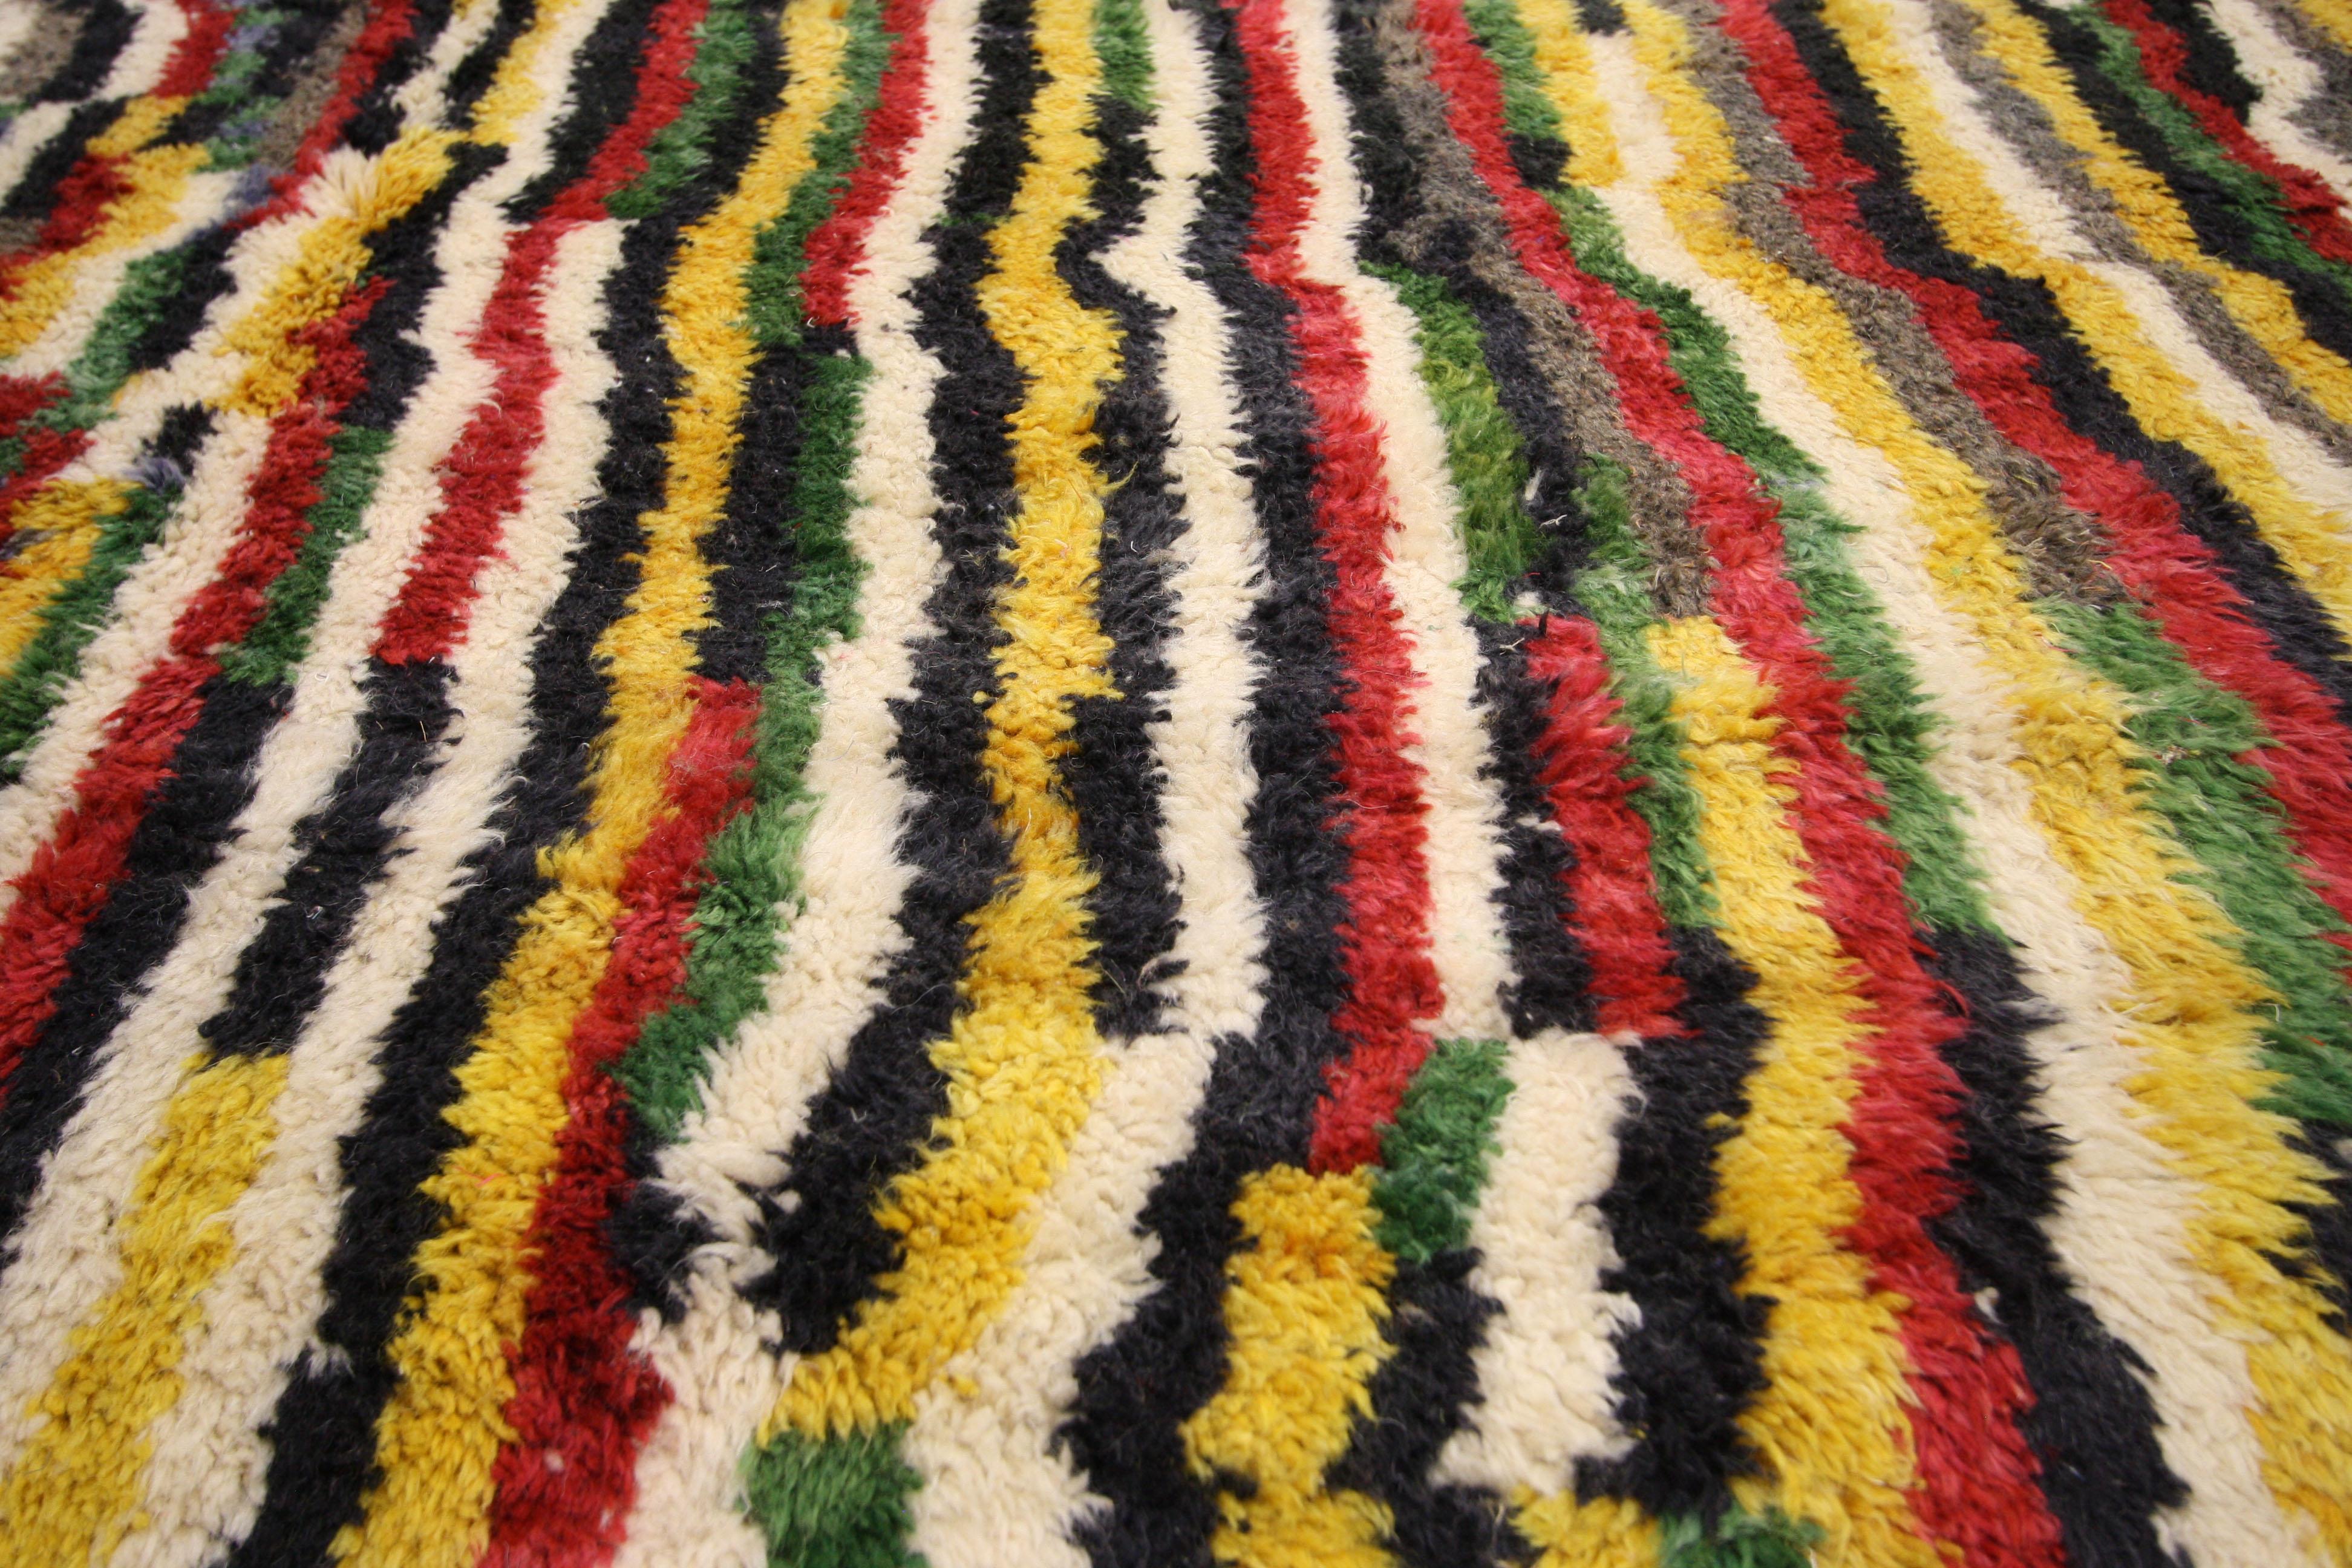 Berber Beni Mrirt Modern Moroccan Rug, Bauhaus Meets Abstract Expressionist In New Condition For Sale In Dallas, TX